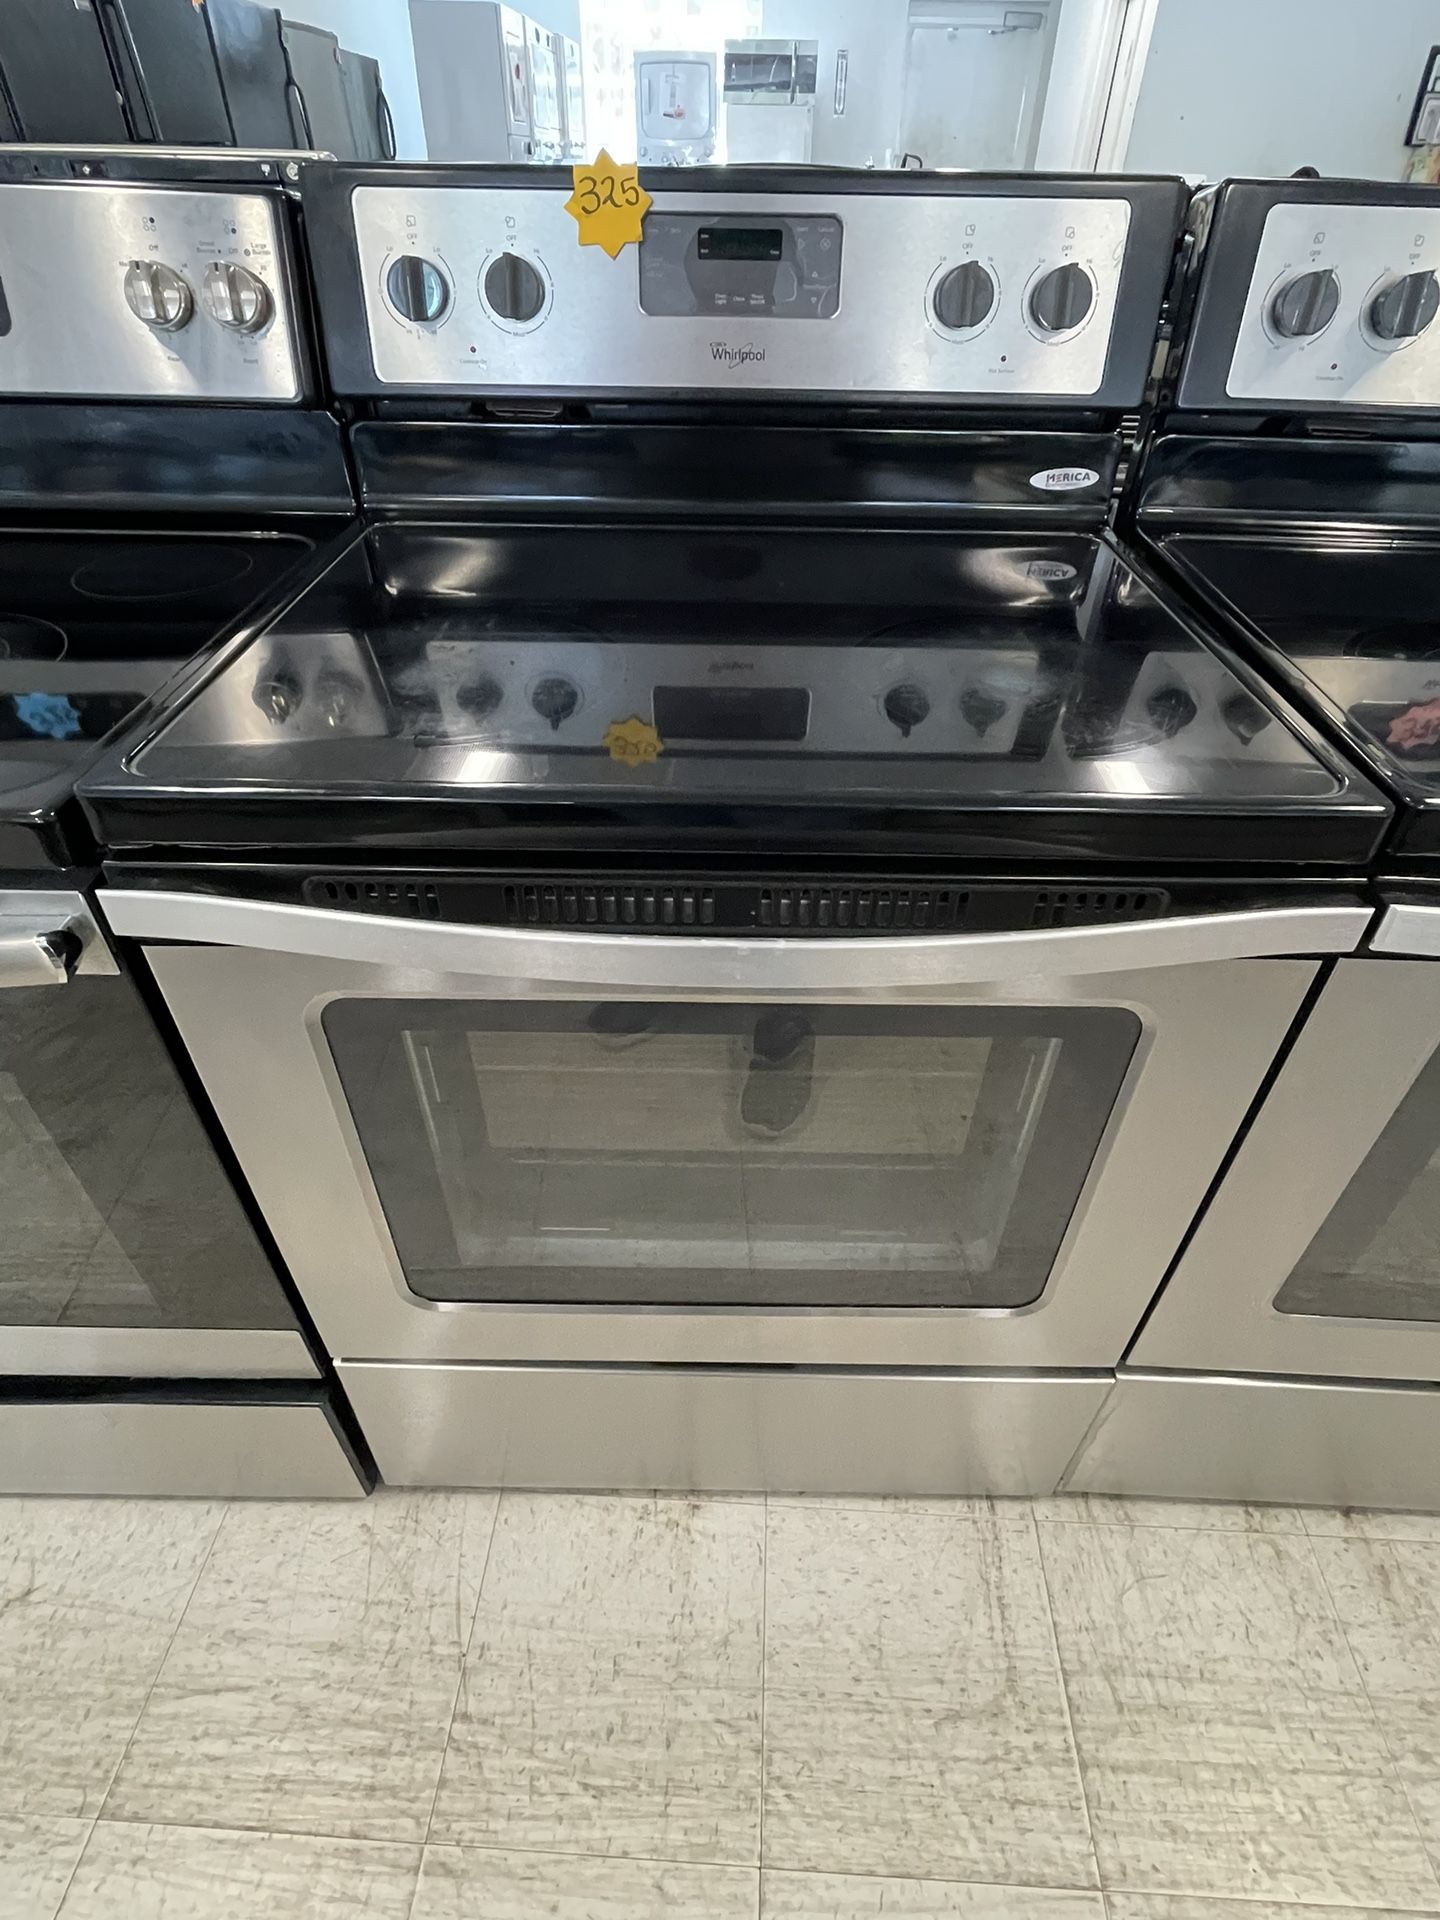 Whirlpool Electric Stove Used In Good Condition With 90days Warranty 